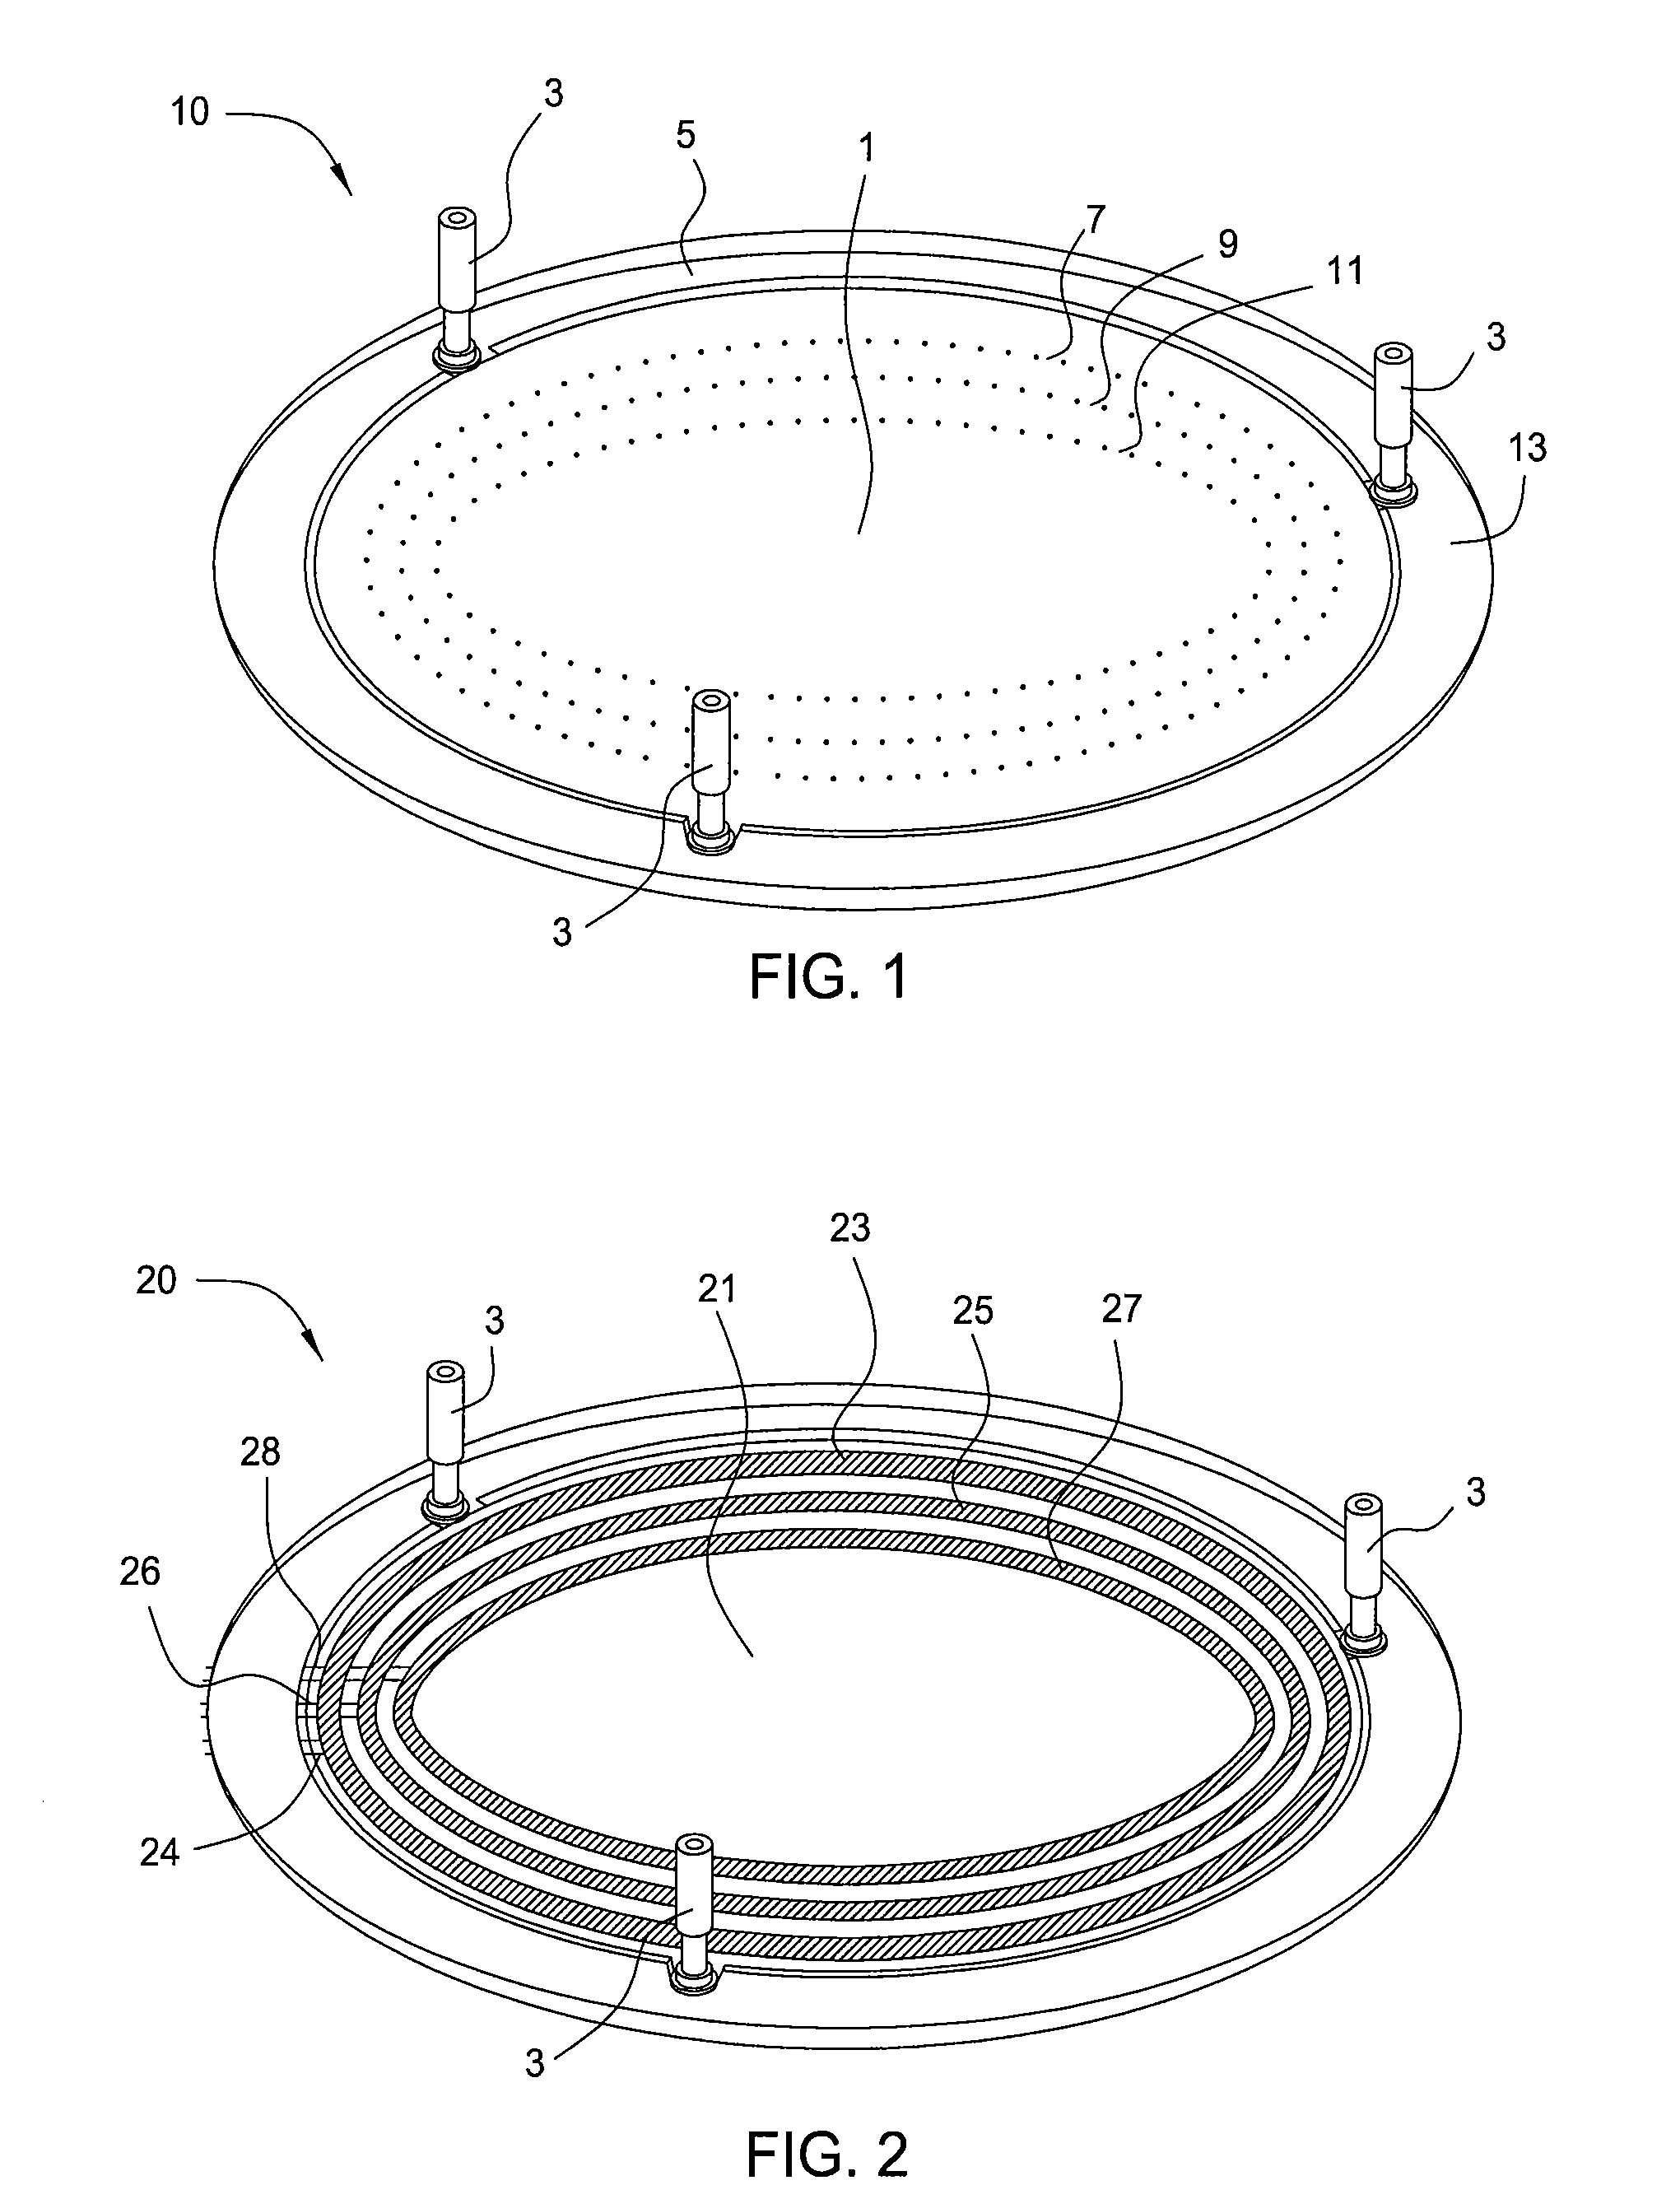 Apparatus and method for supporting, positioning and rotating a substrate in a processing chamber